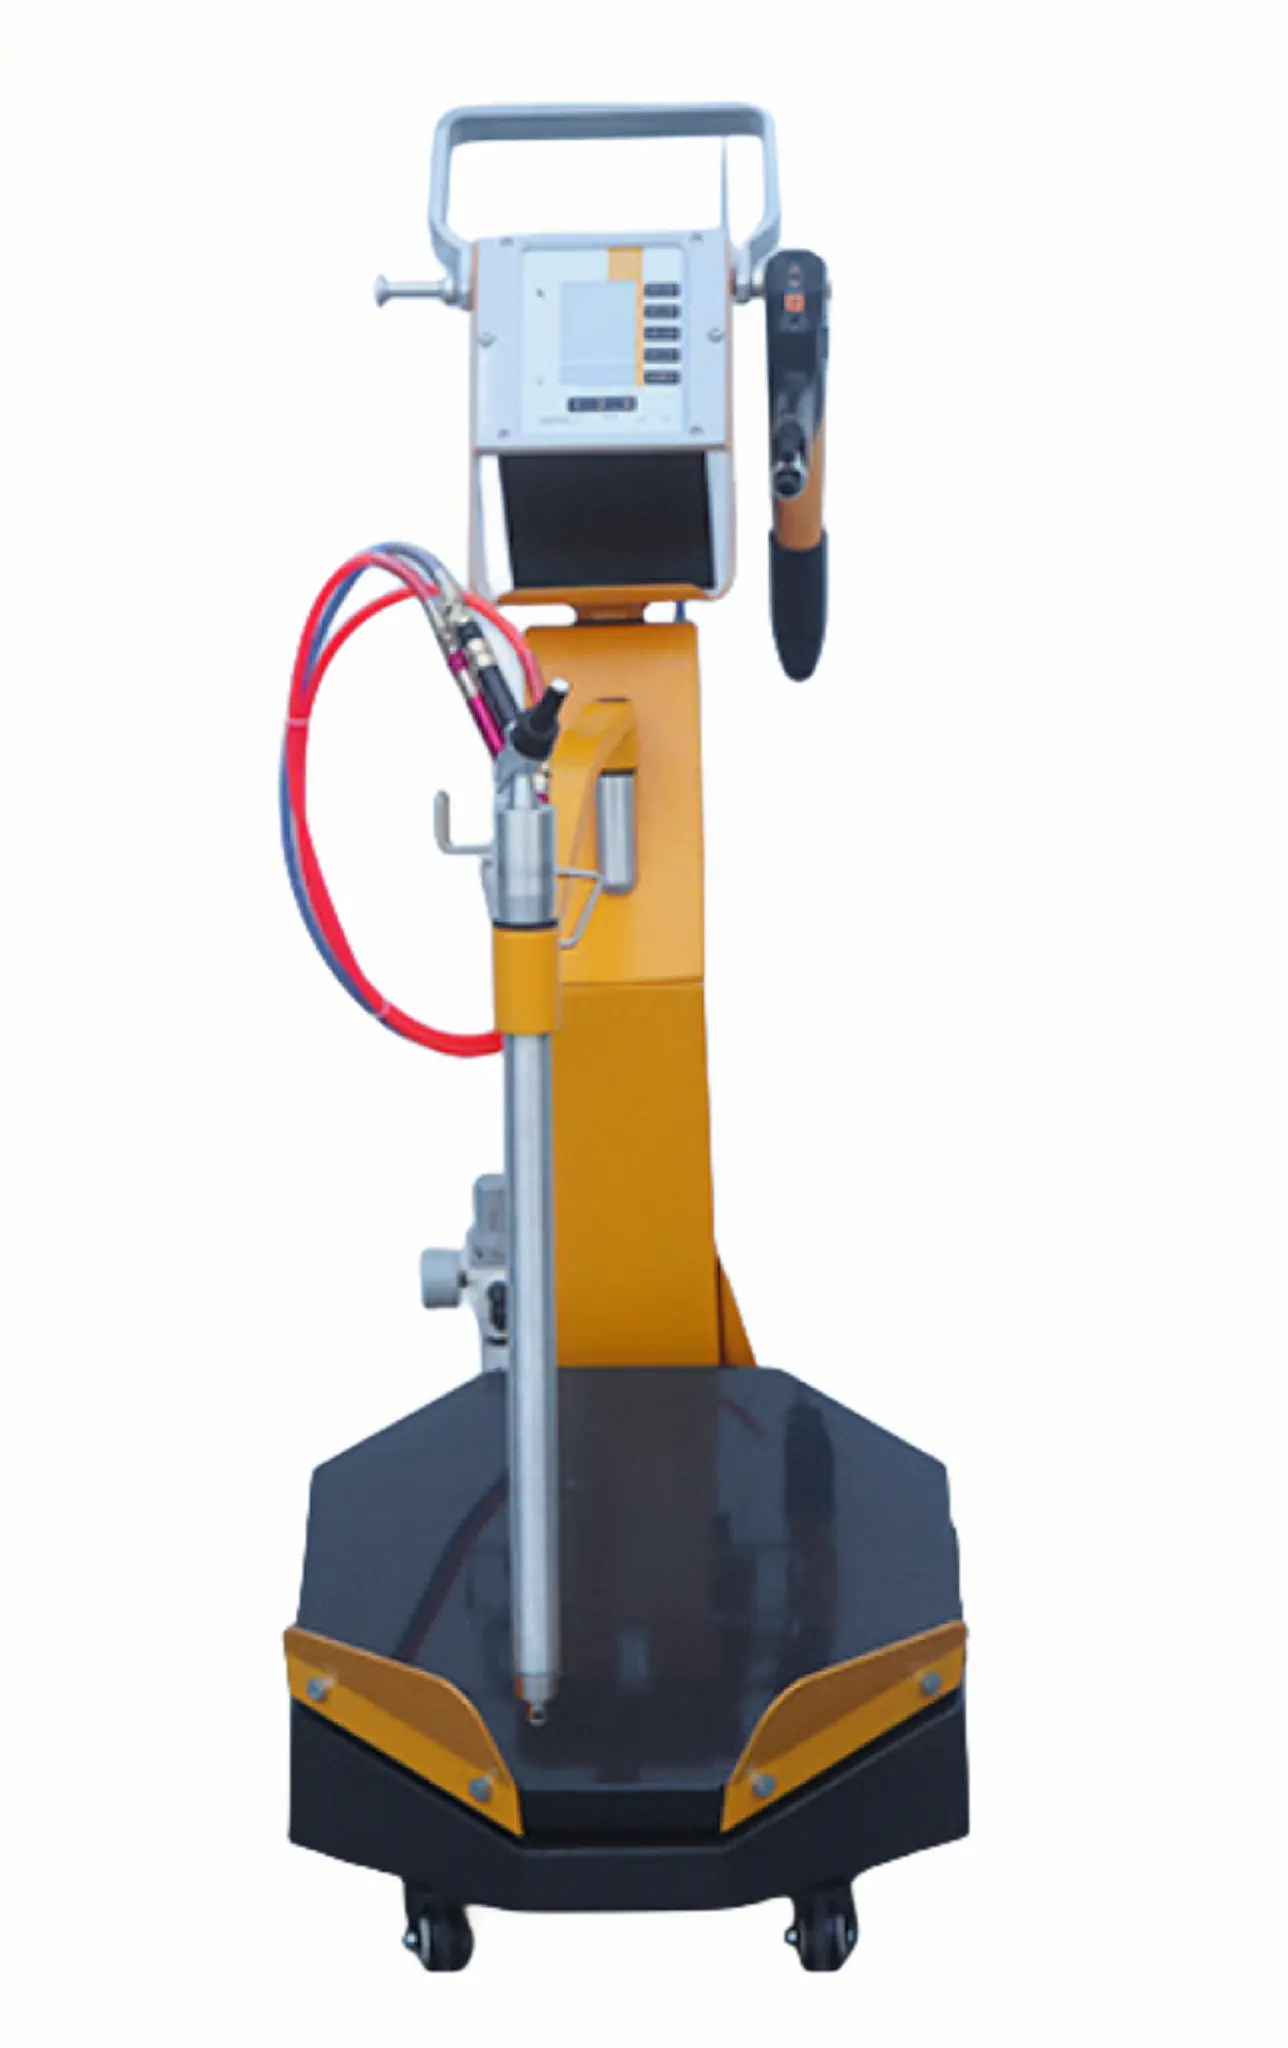 New PLC Coated Spray Coating Gun At An Price For Manufacturing Plants Retail And Restaurants